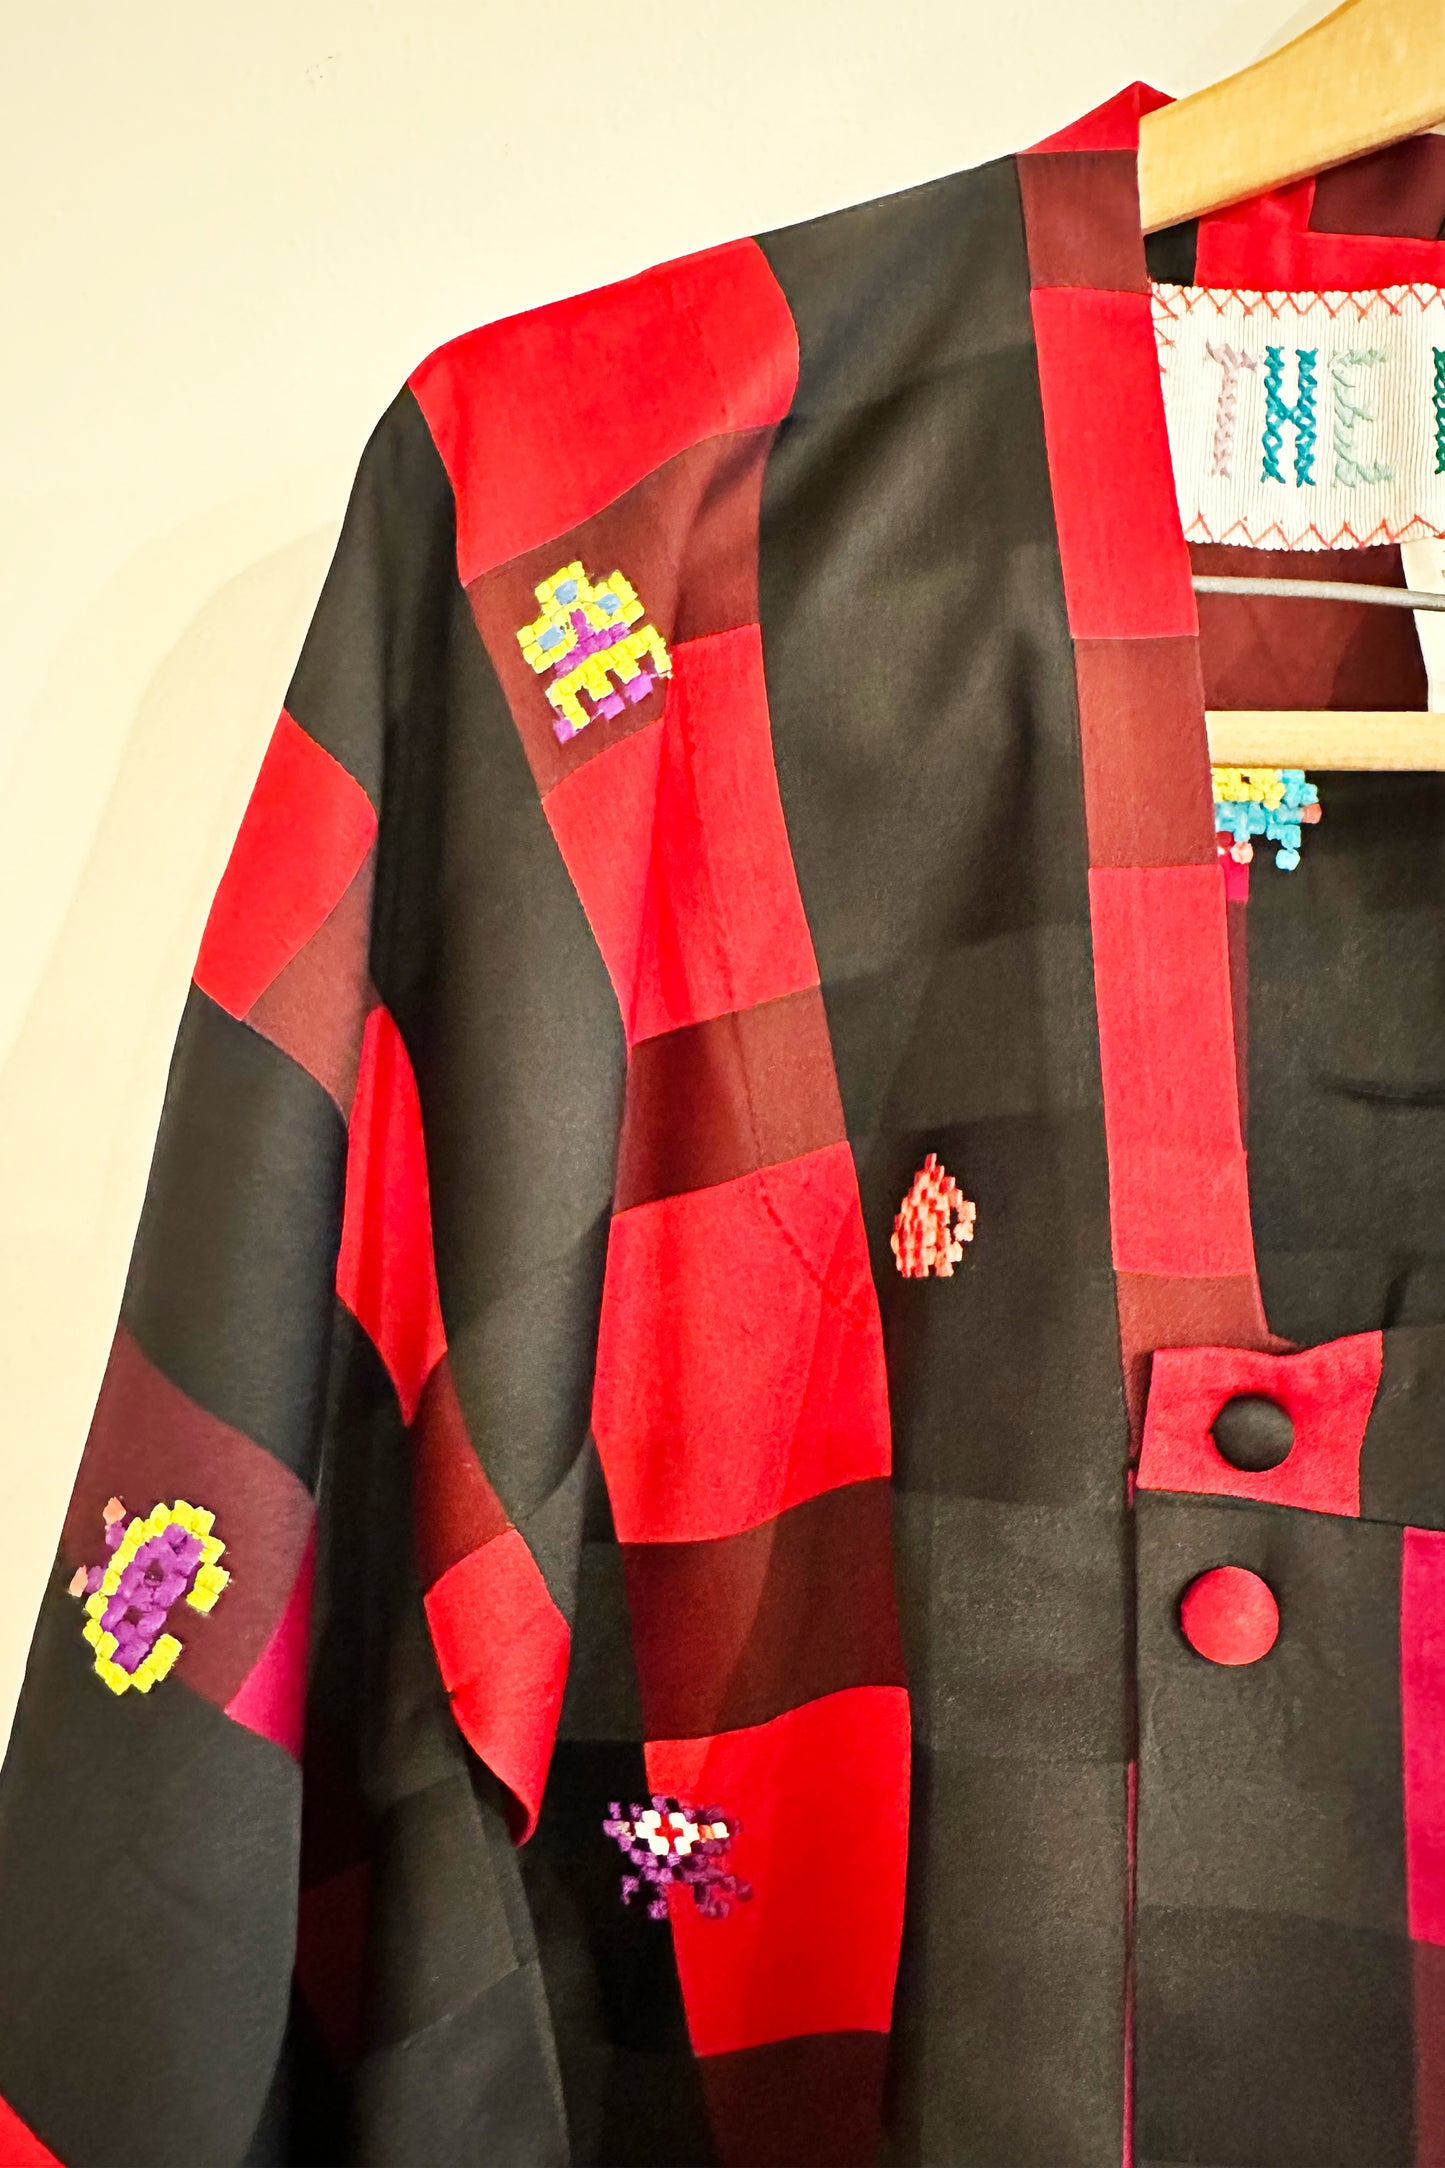 "Space Invaders" Black and Red Plaid Kimono